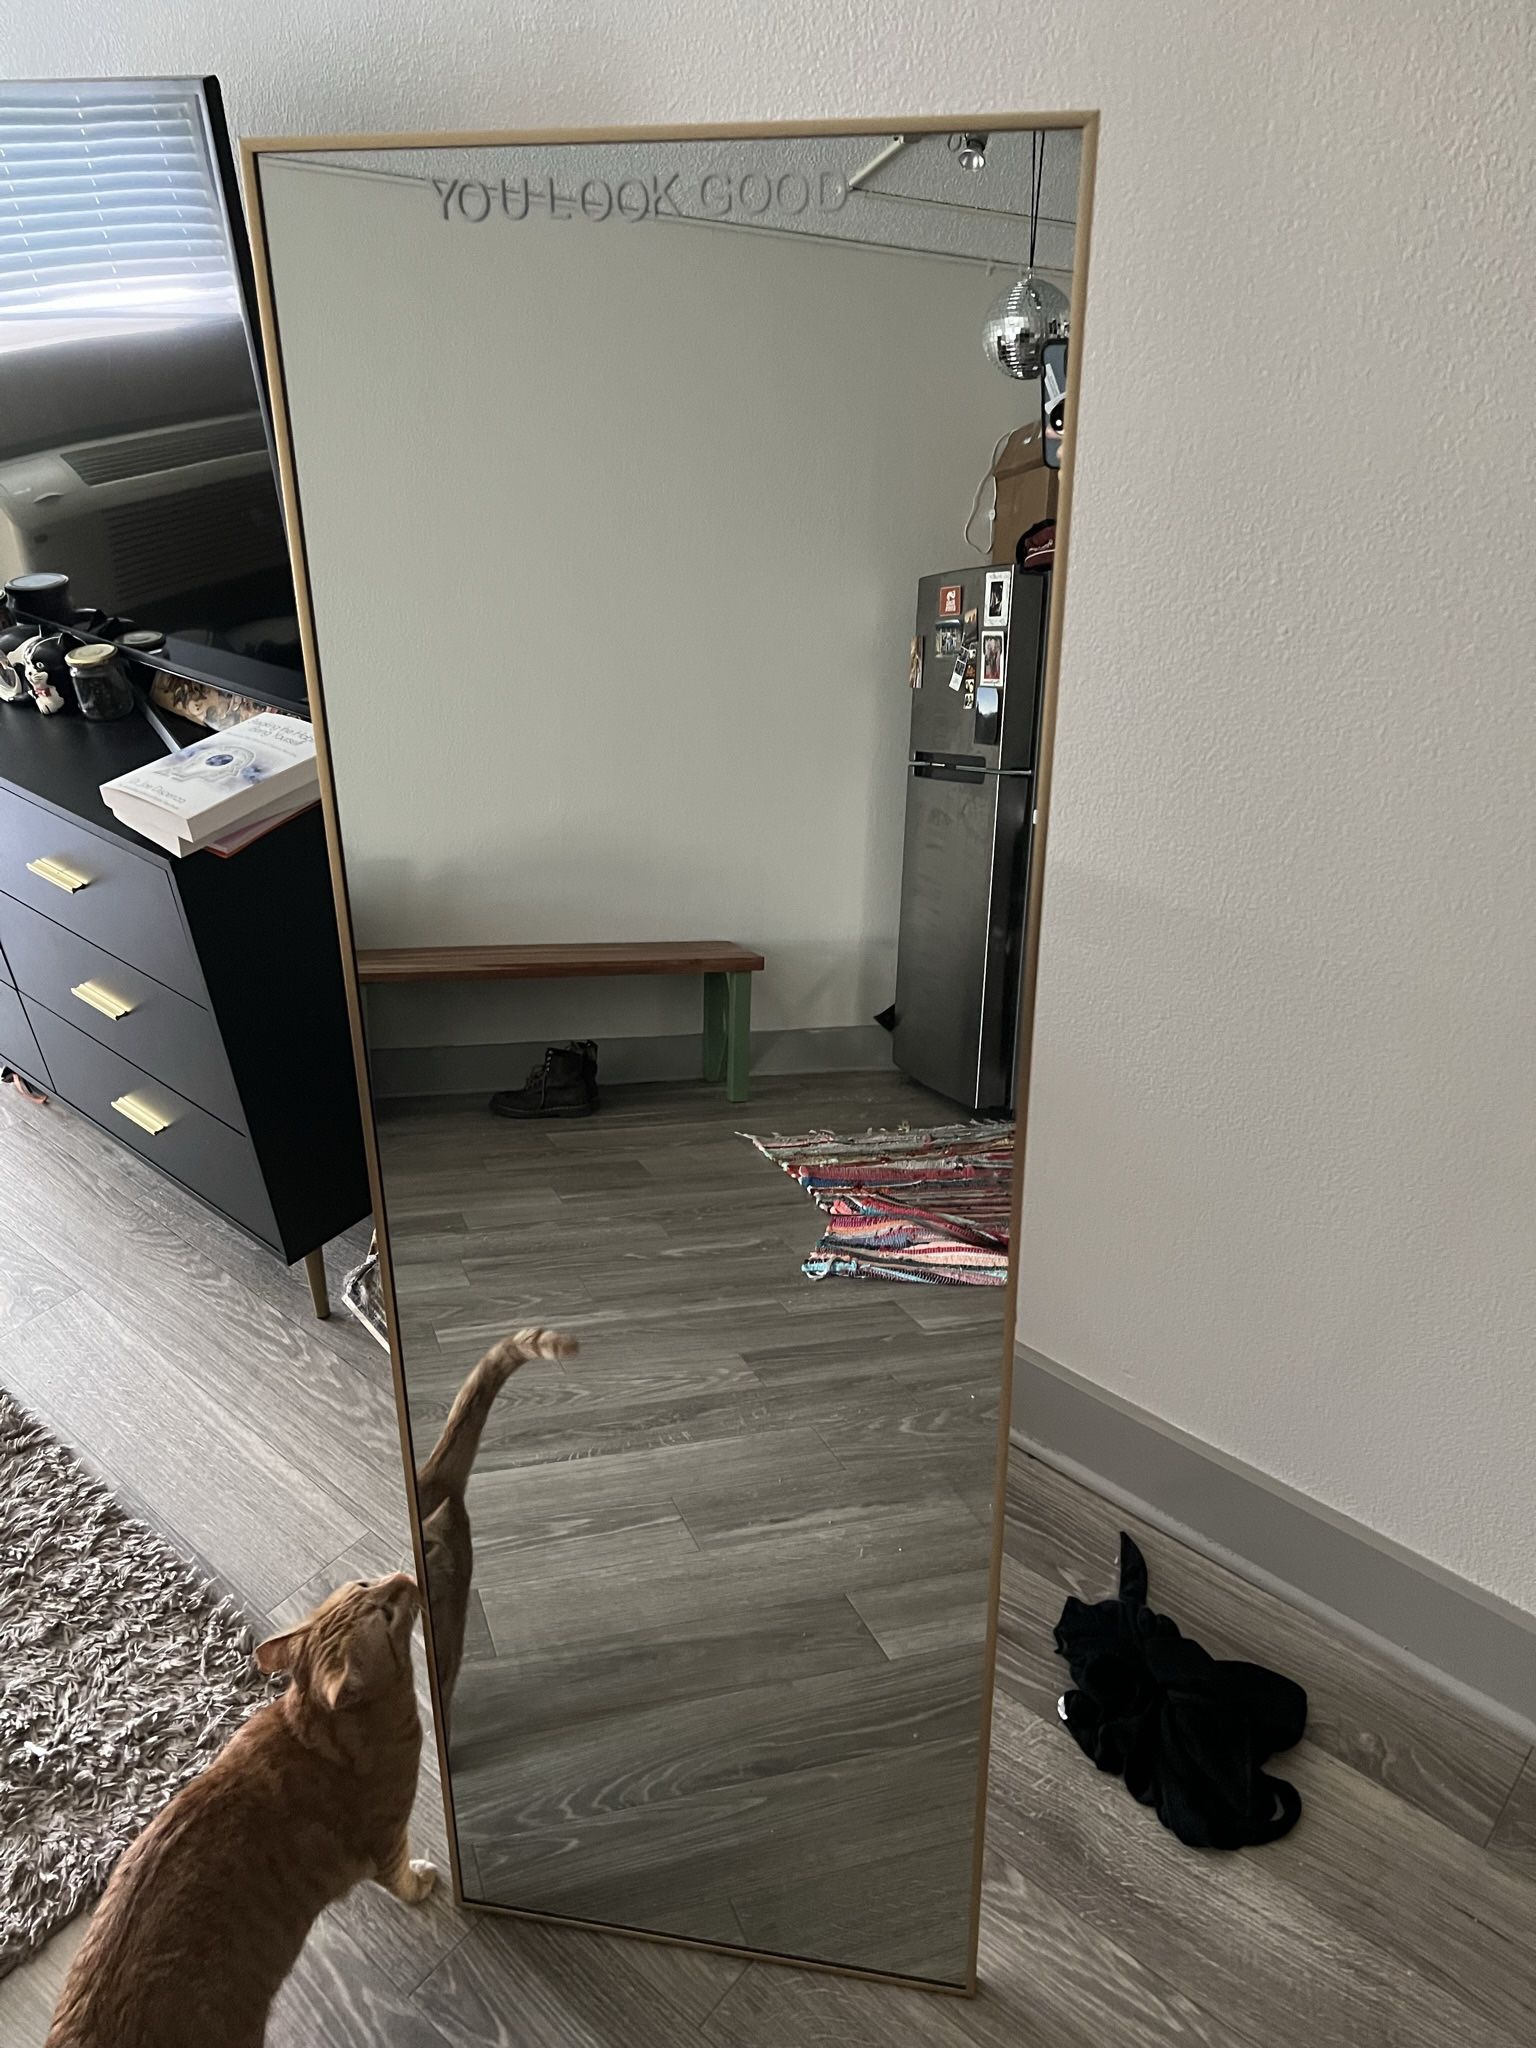 MOVING 4/3 NEED GONE. floor length mirror! “you look good” 